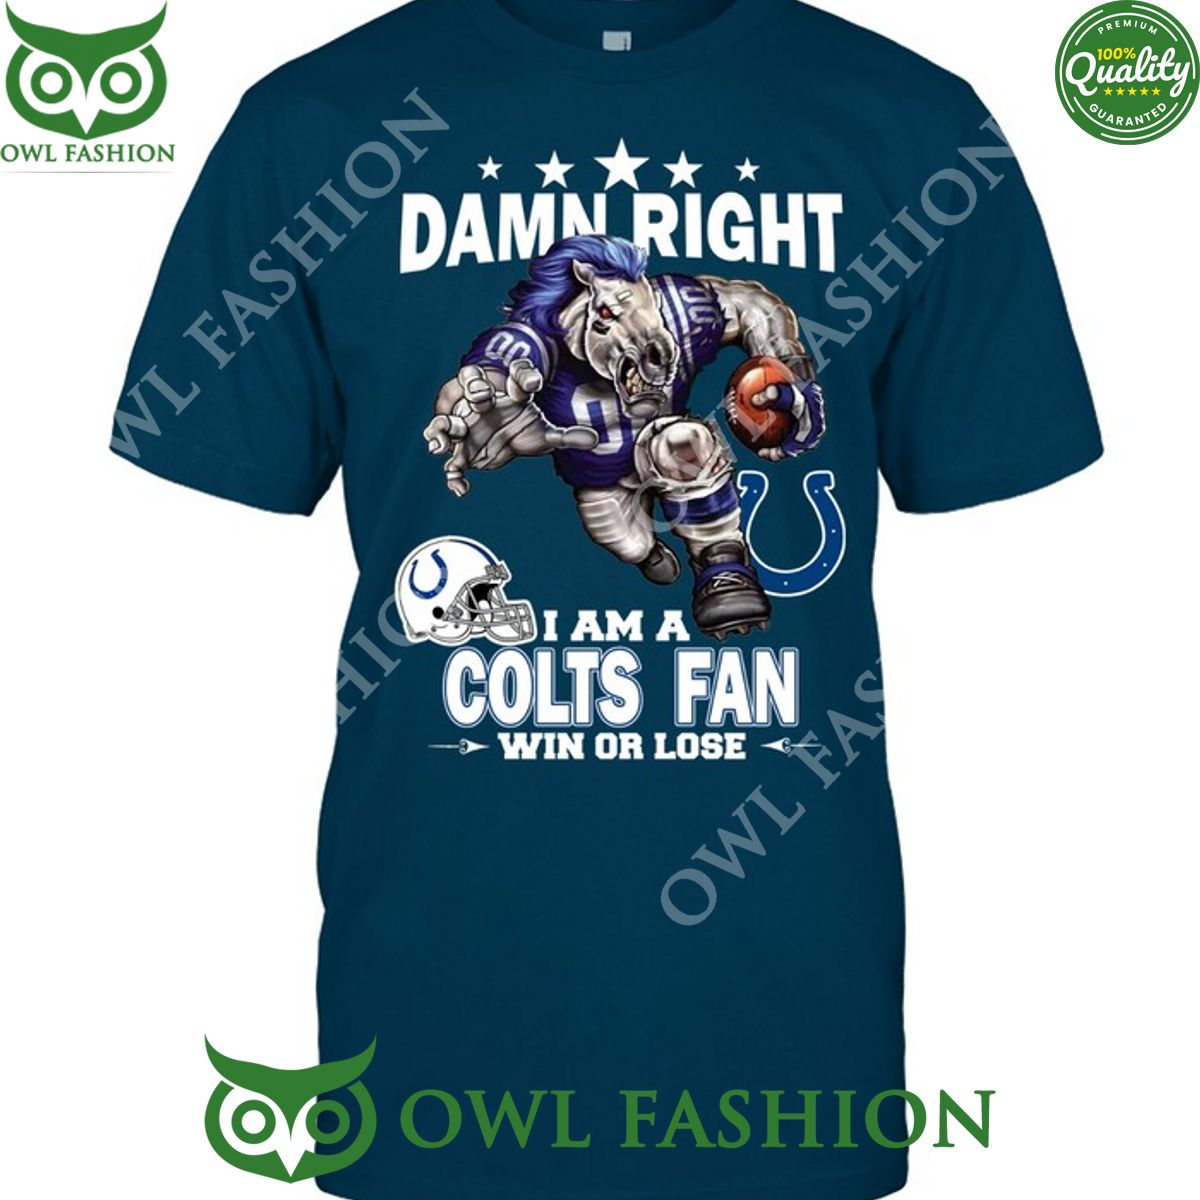 Damn Right Indianapolis Colts NFL Fan Win or lose t shirt Nice photo dude